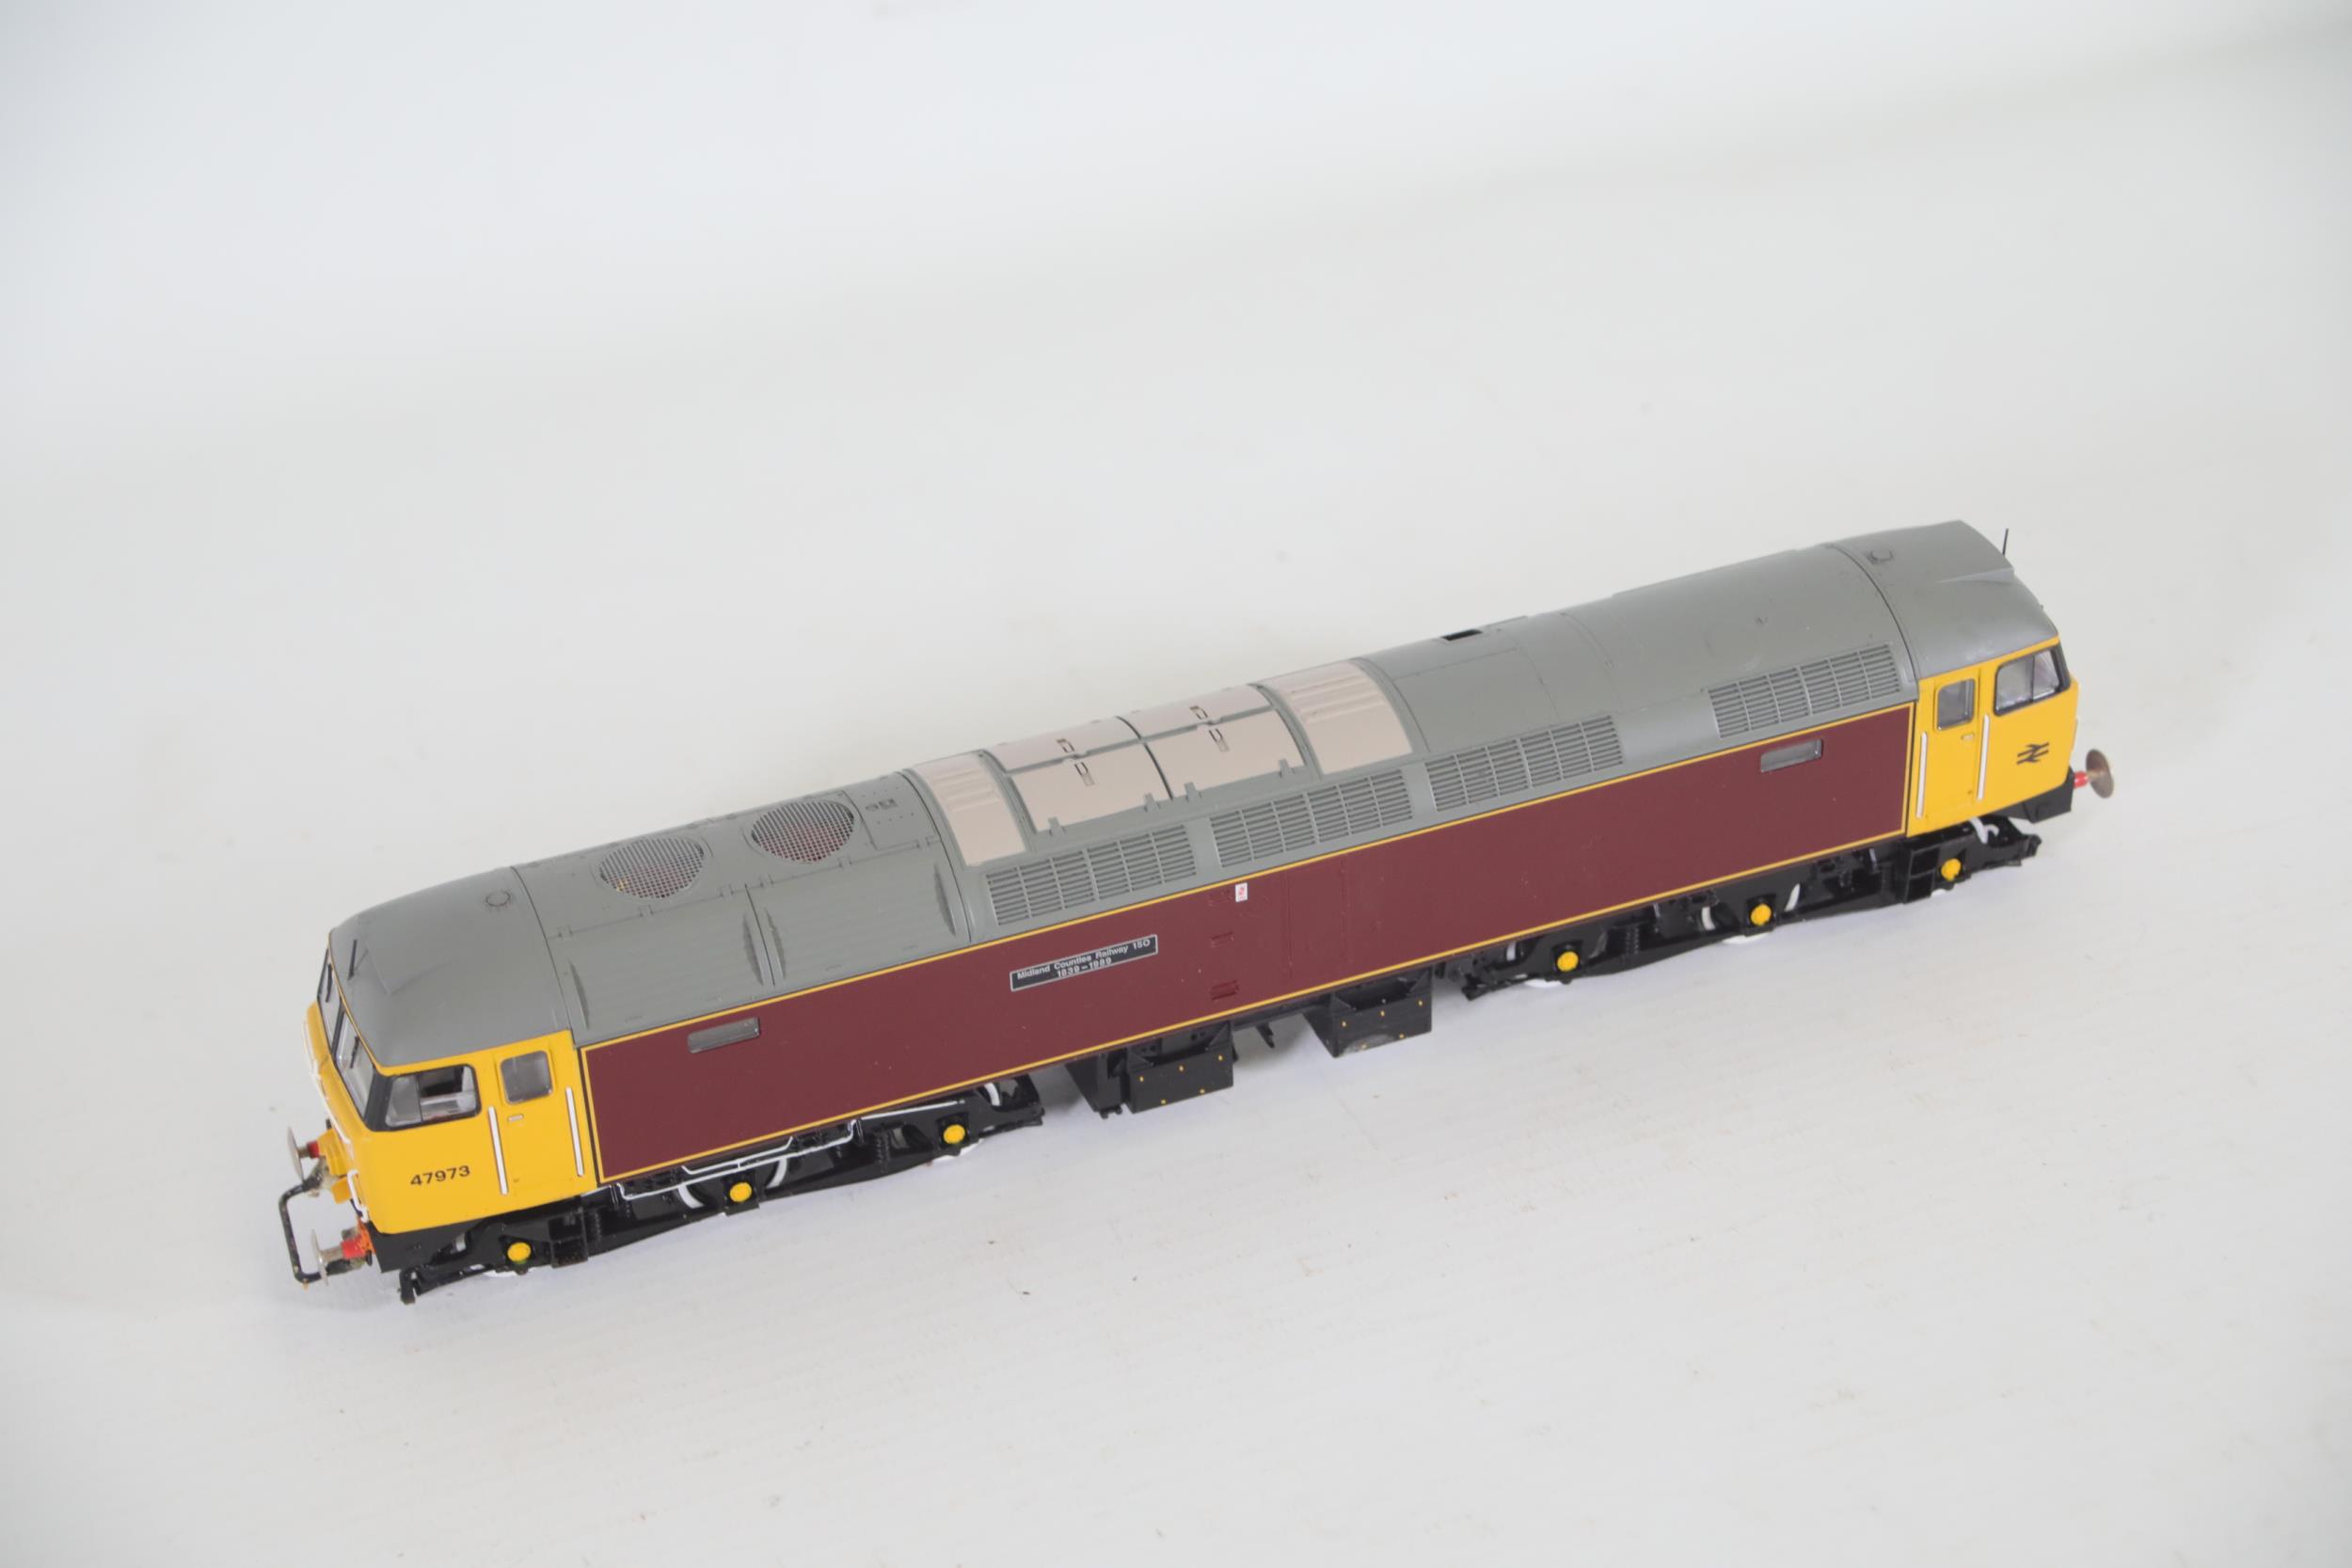 Bachmann Class 47 47973 Midland Counties Locomotive Boxed - Image 2 of 8